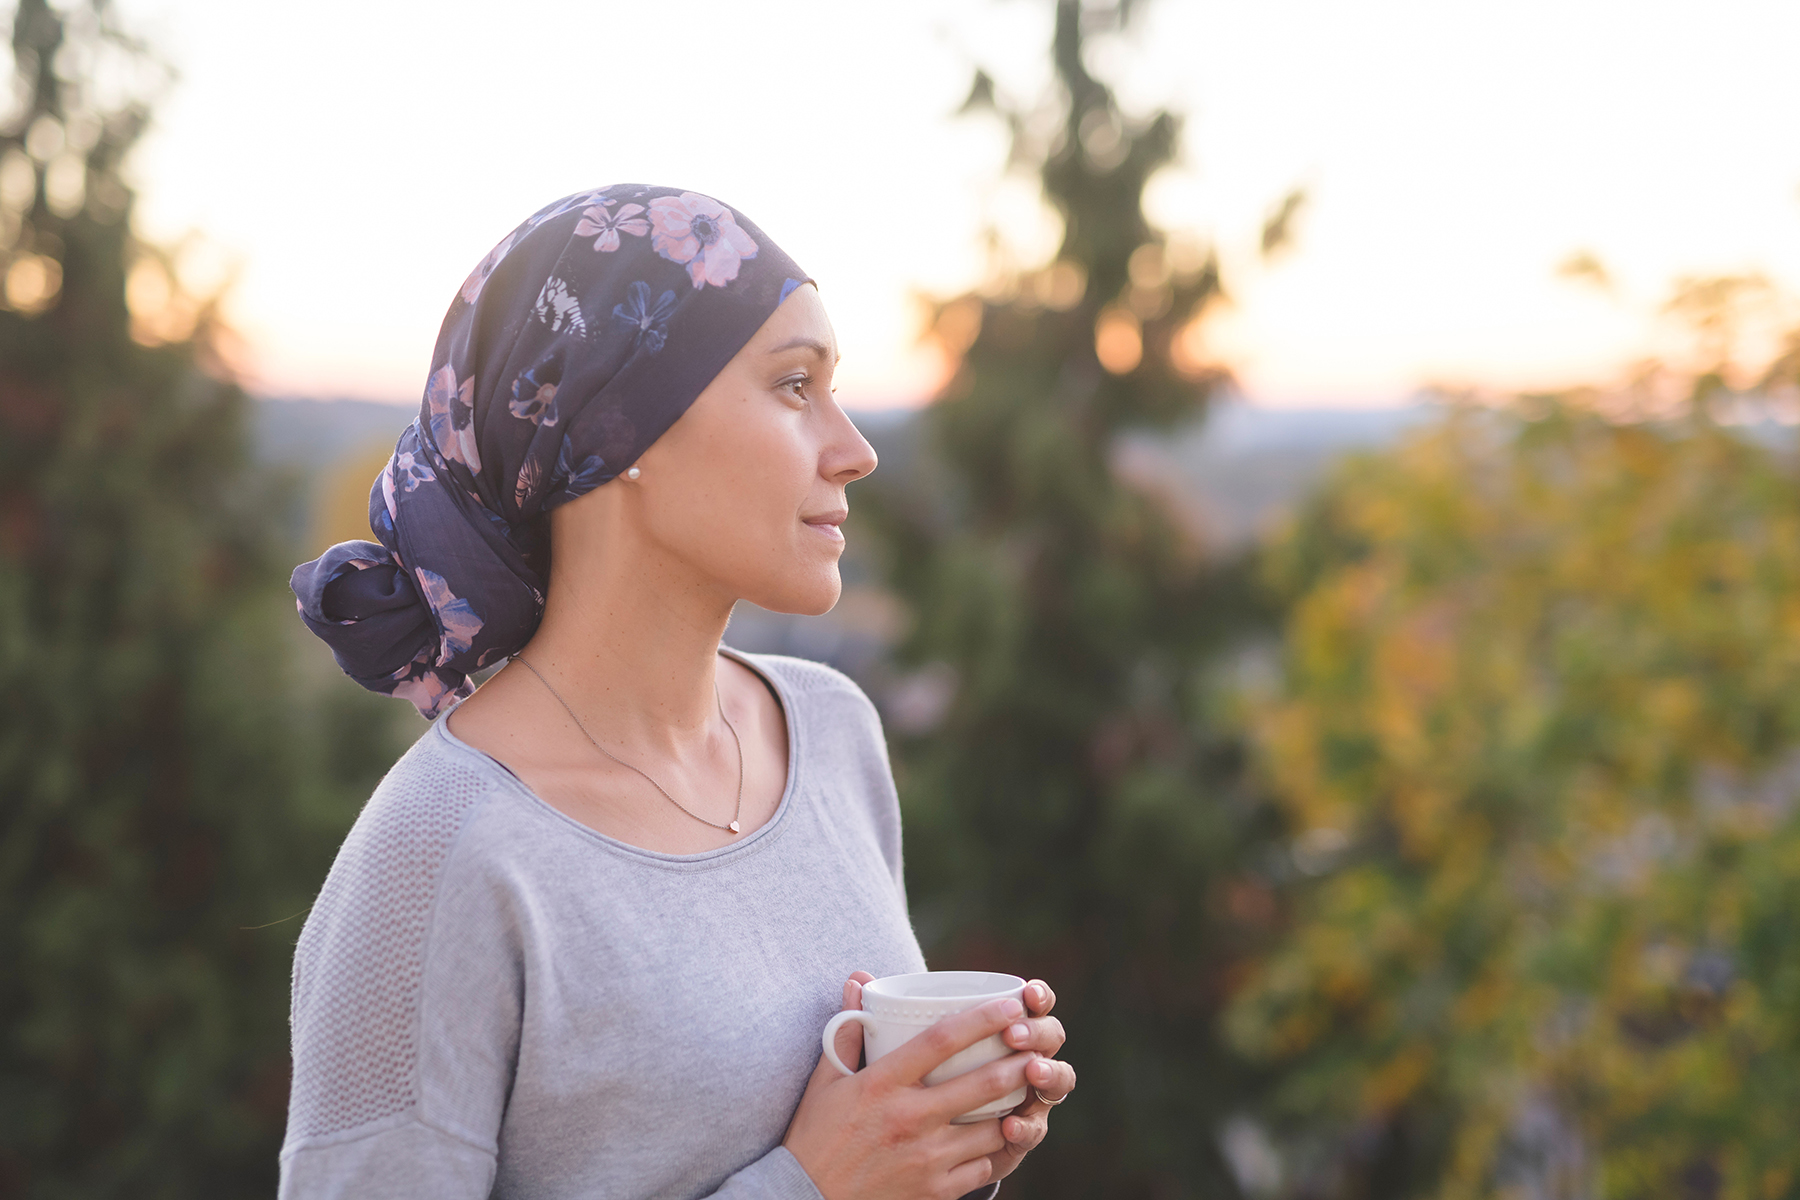 woman battling cancer contemplates her life